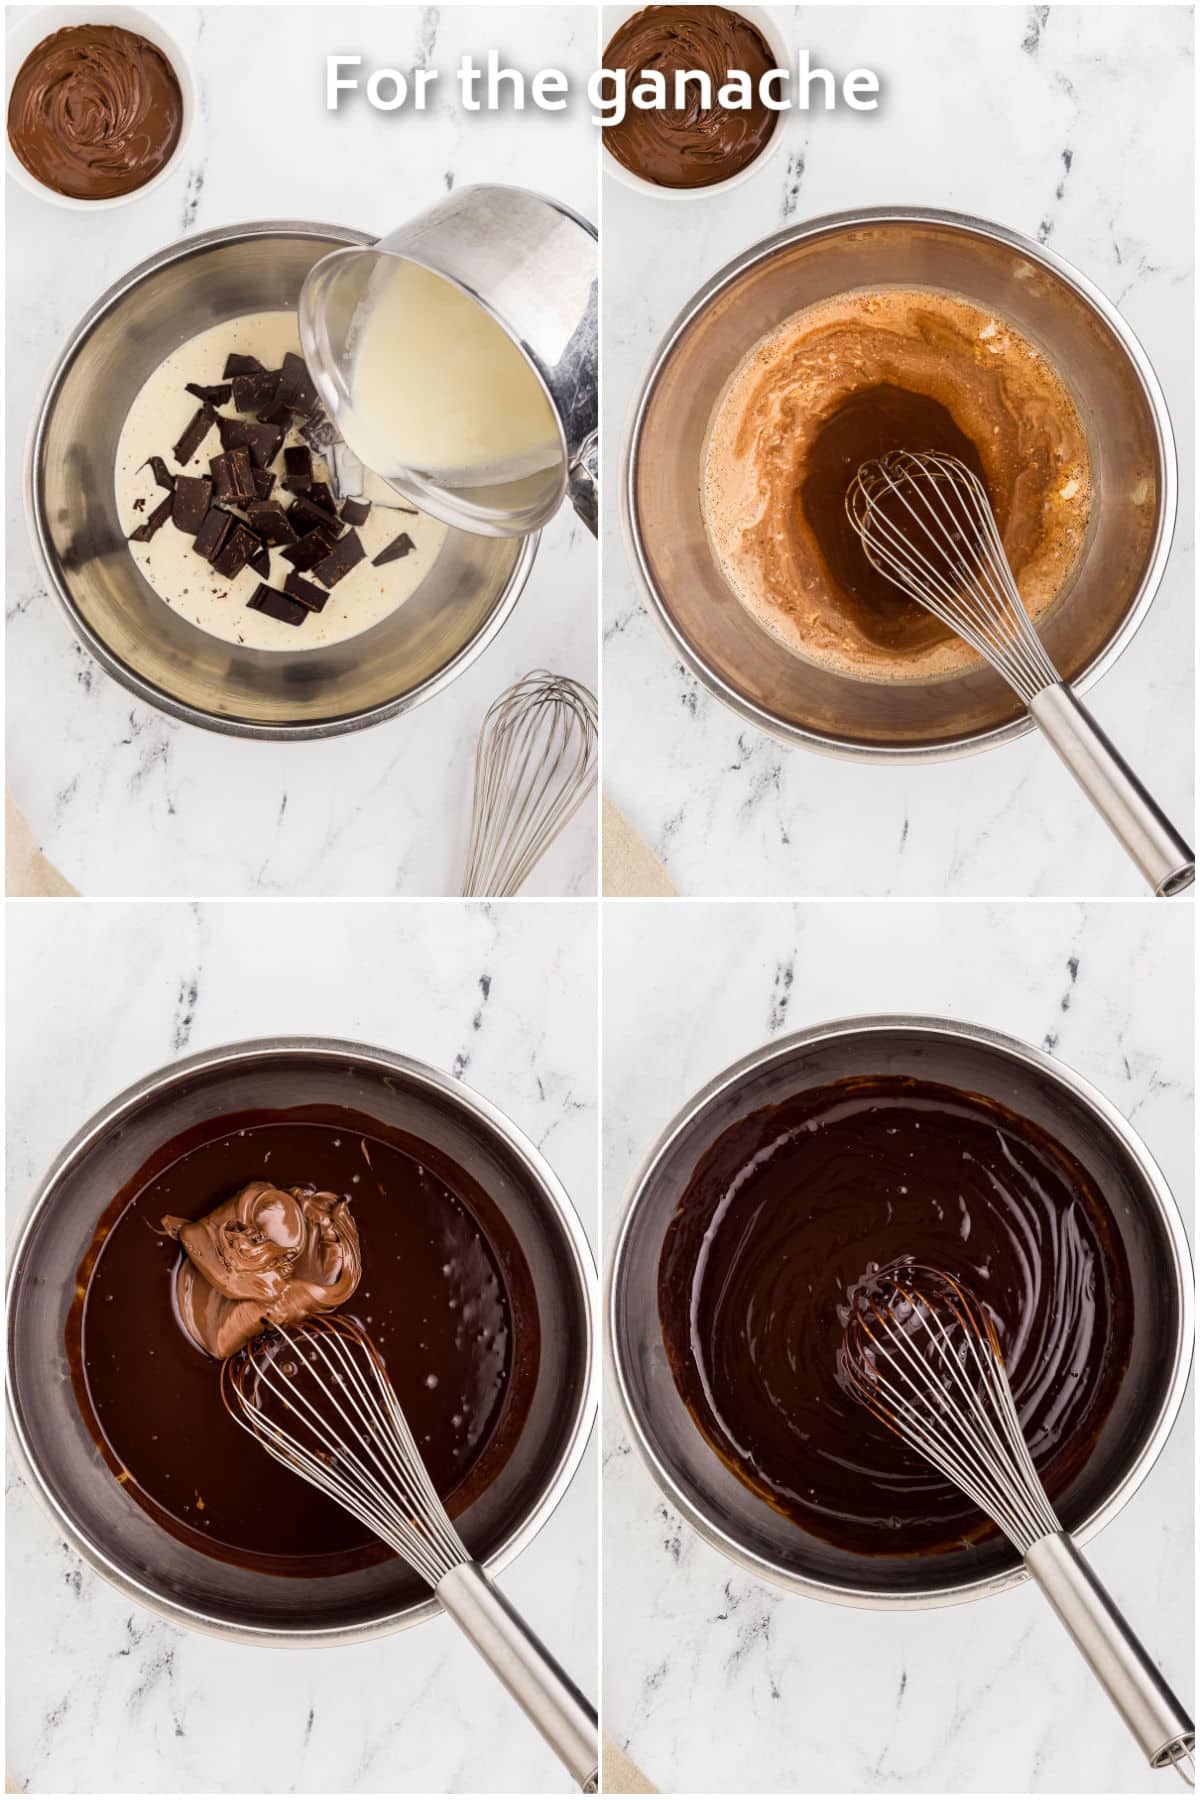 Chocolate, cream and Nutella whisked together to make ganache.